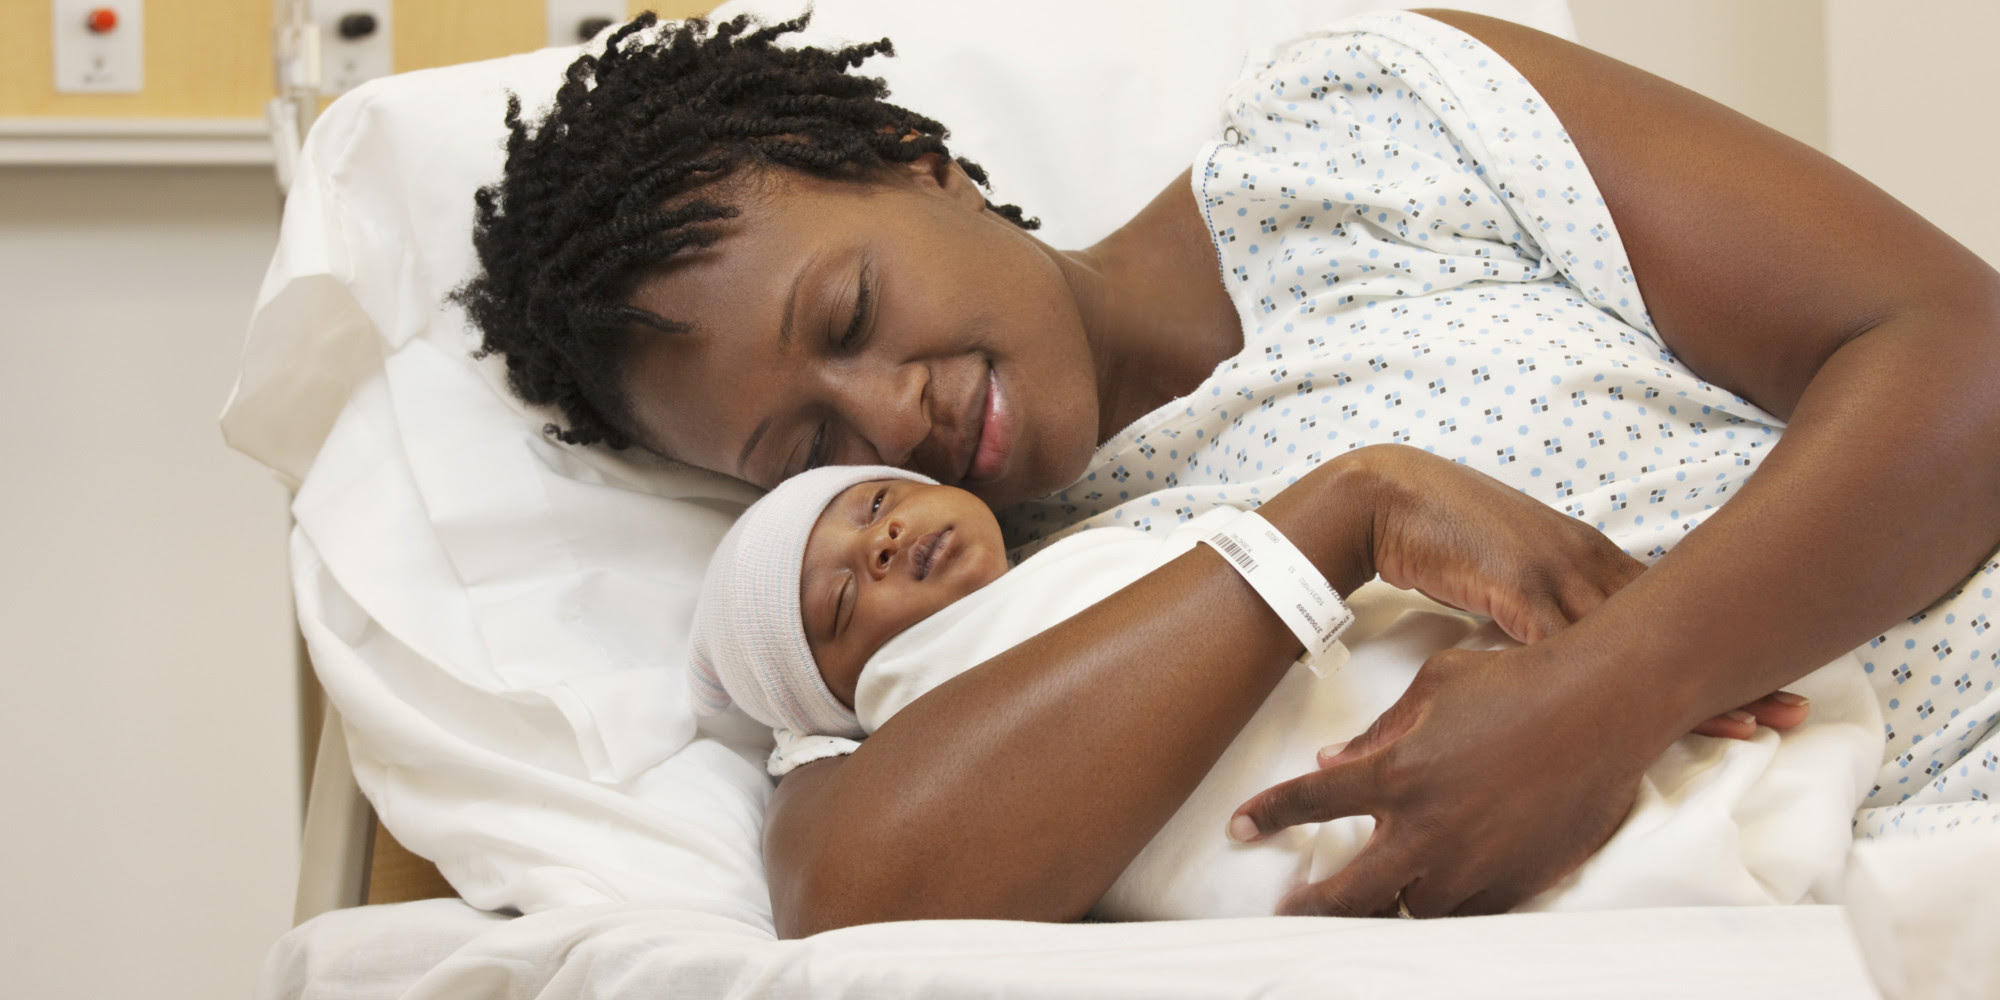 5 things nobody tells you about giving birth